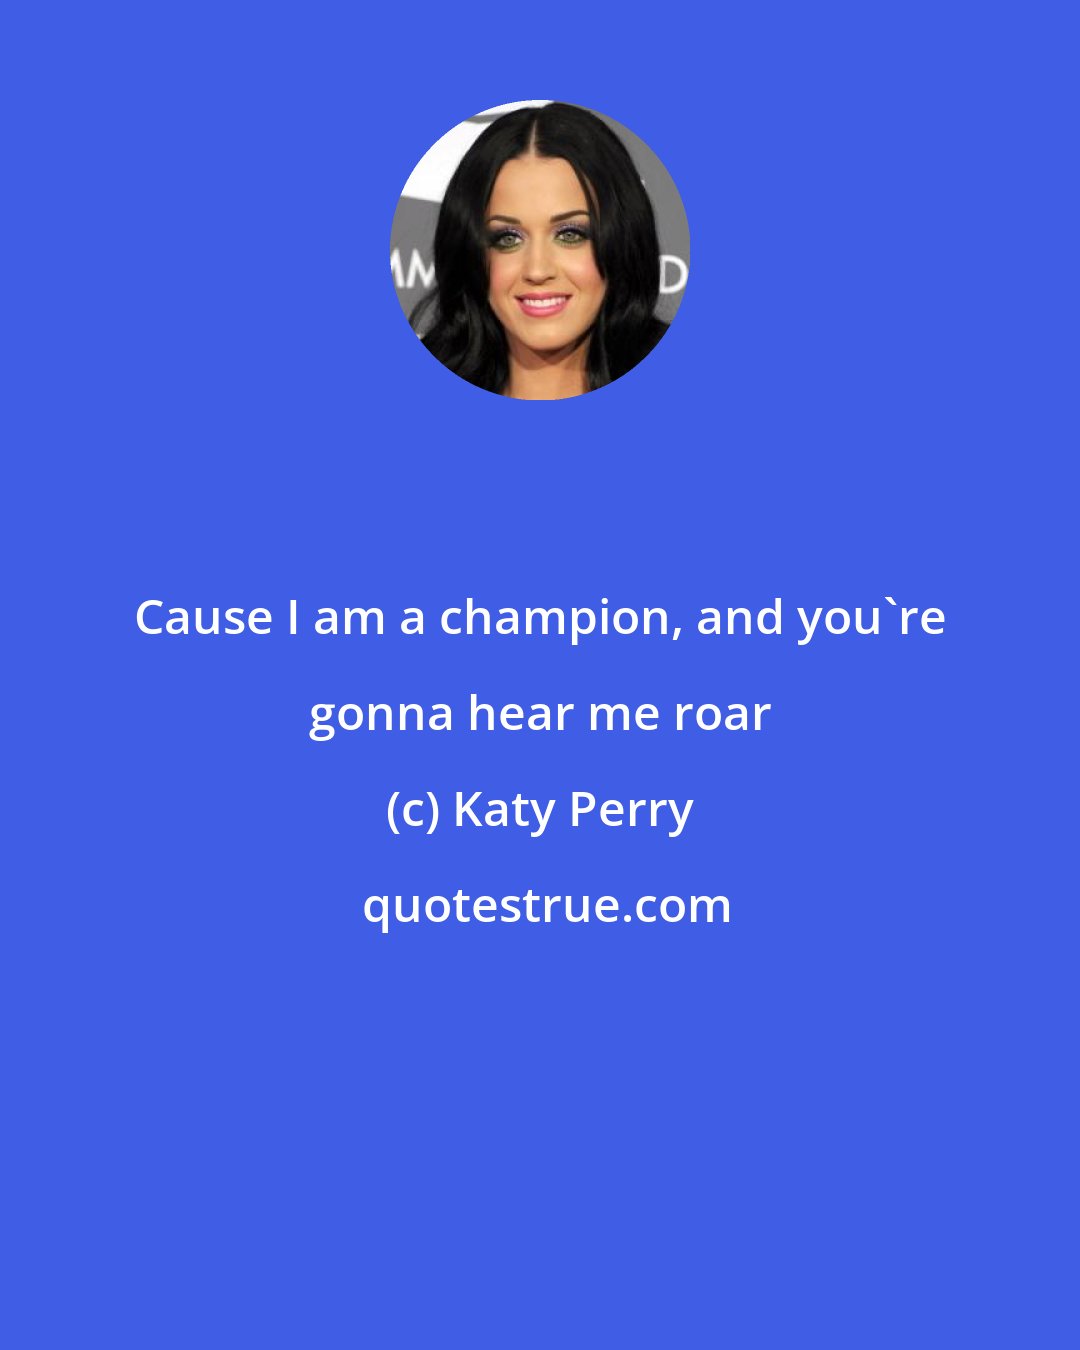 Katy Perry: Cause I am a champion, and you're gonna hear me roar